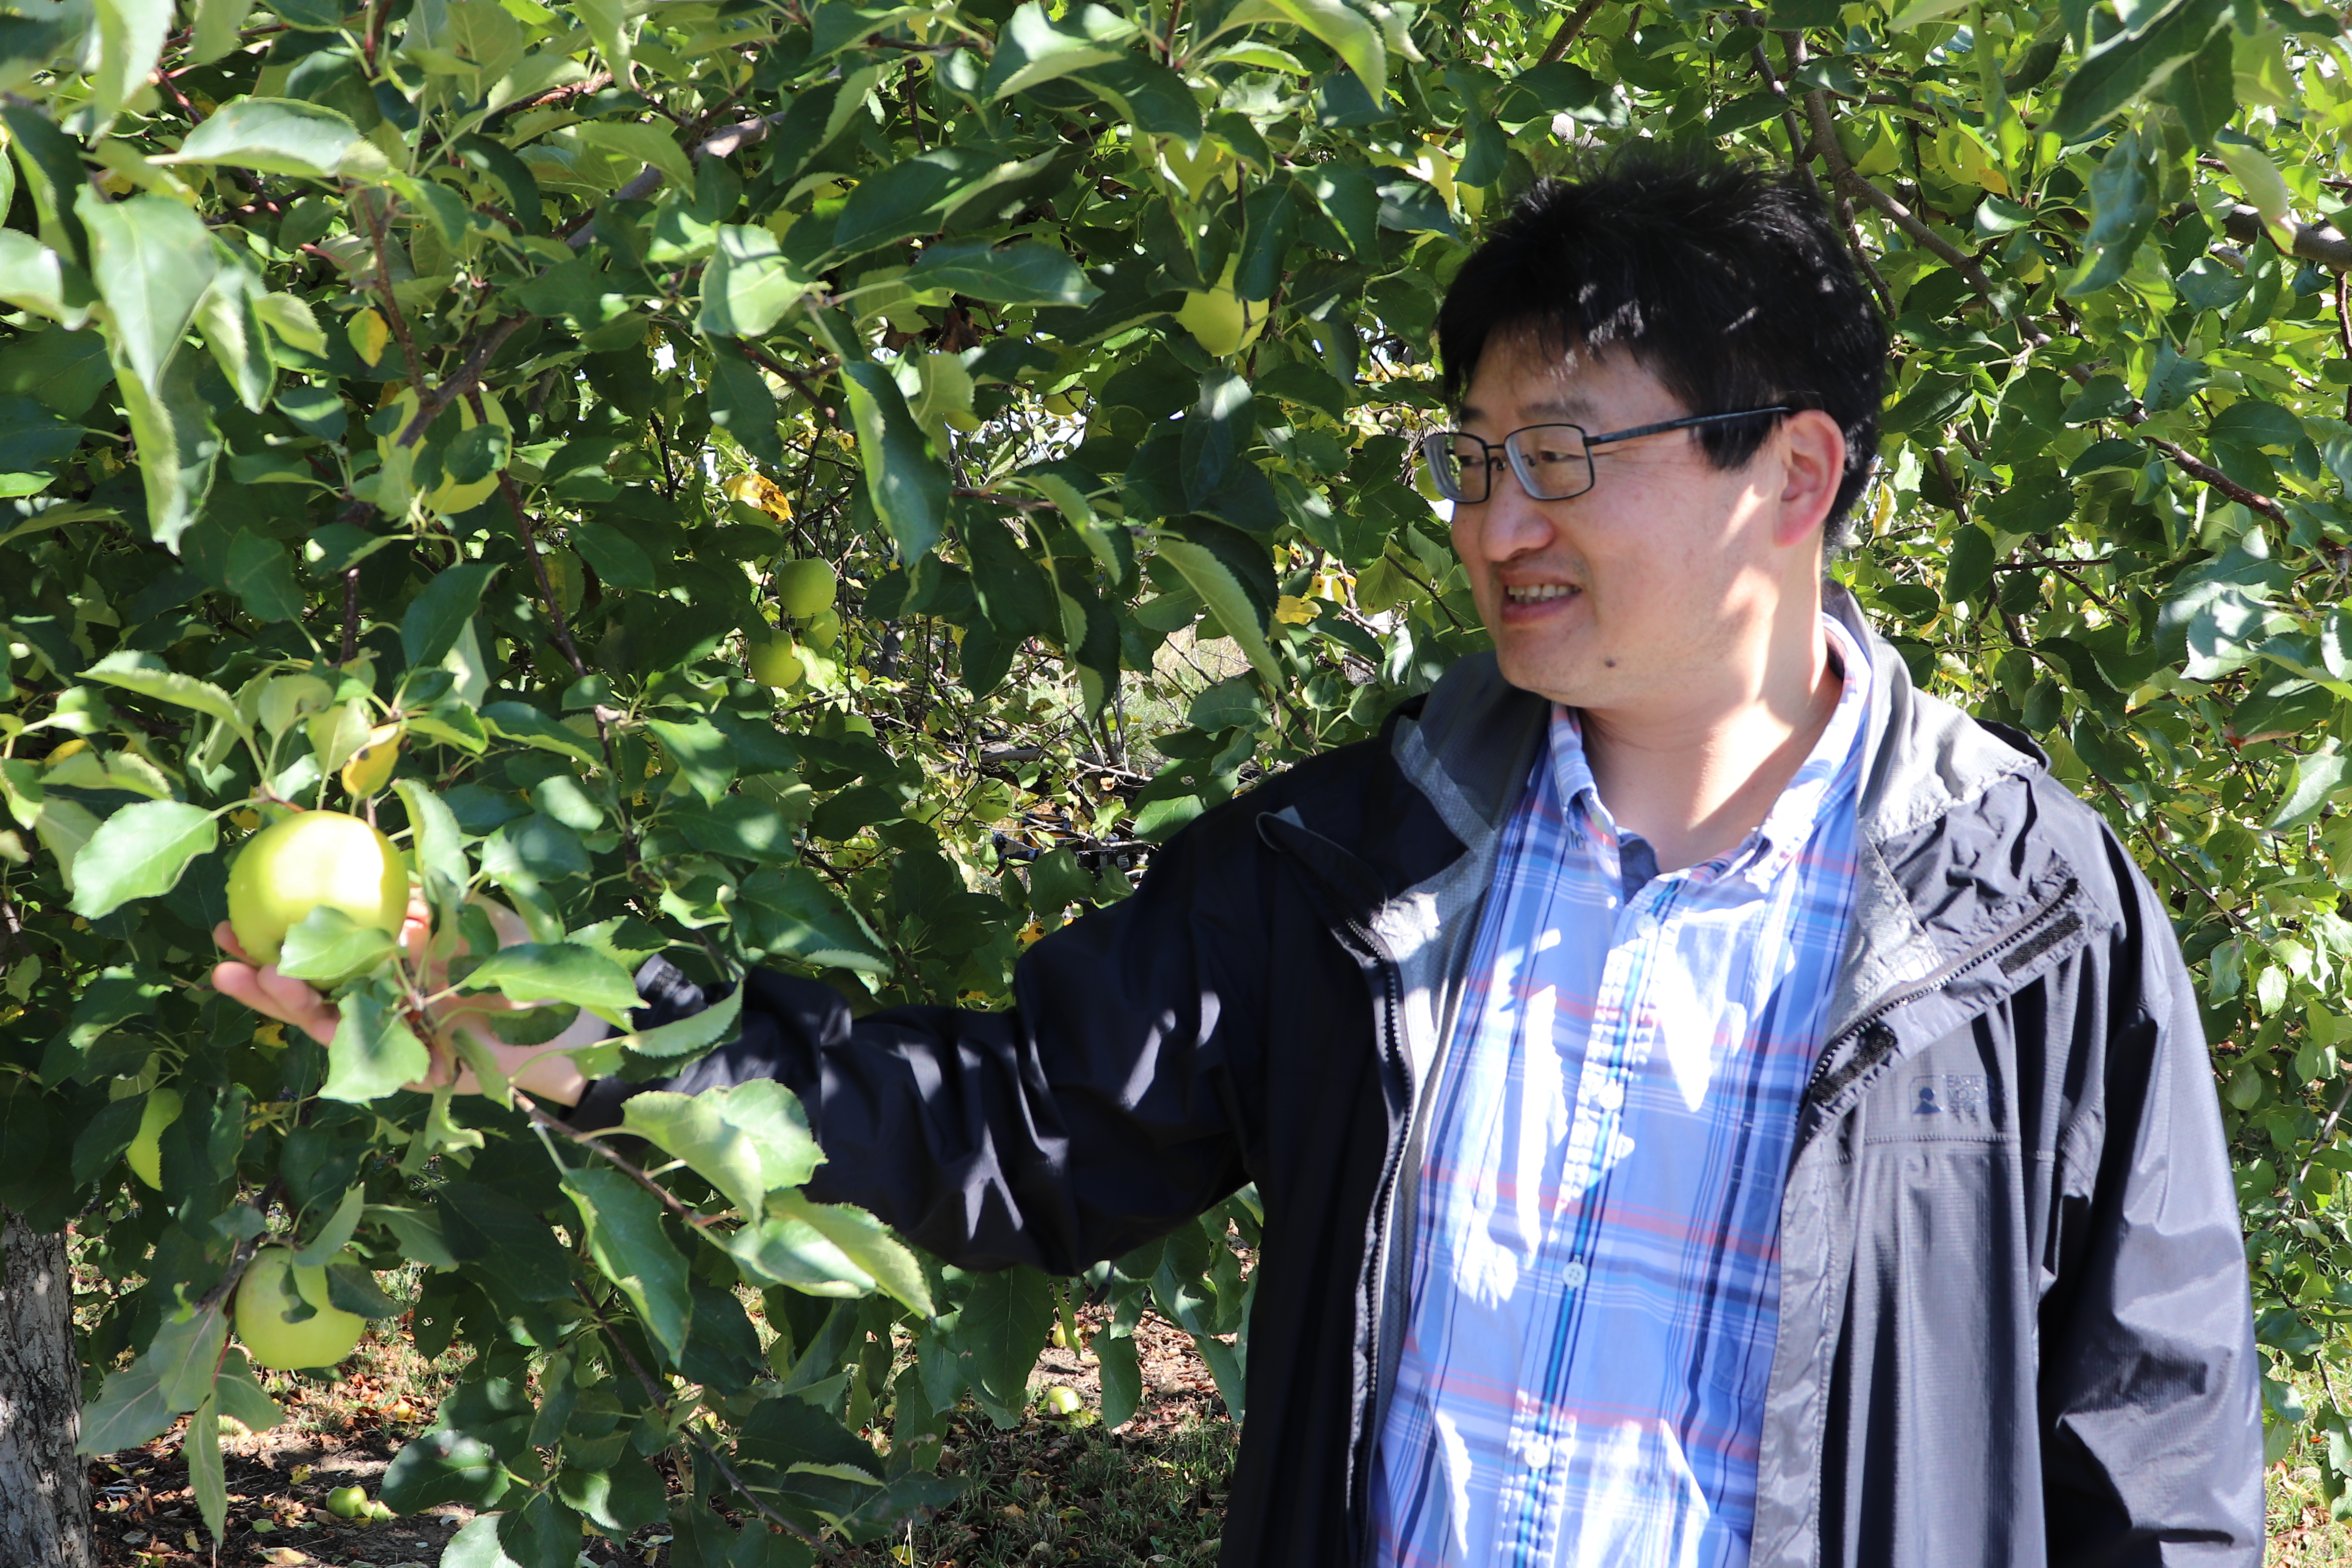 A medium shot of Zhangjun Fei under an apple tree, holding a green apple that is still on the branch in his right hand.